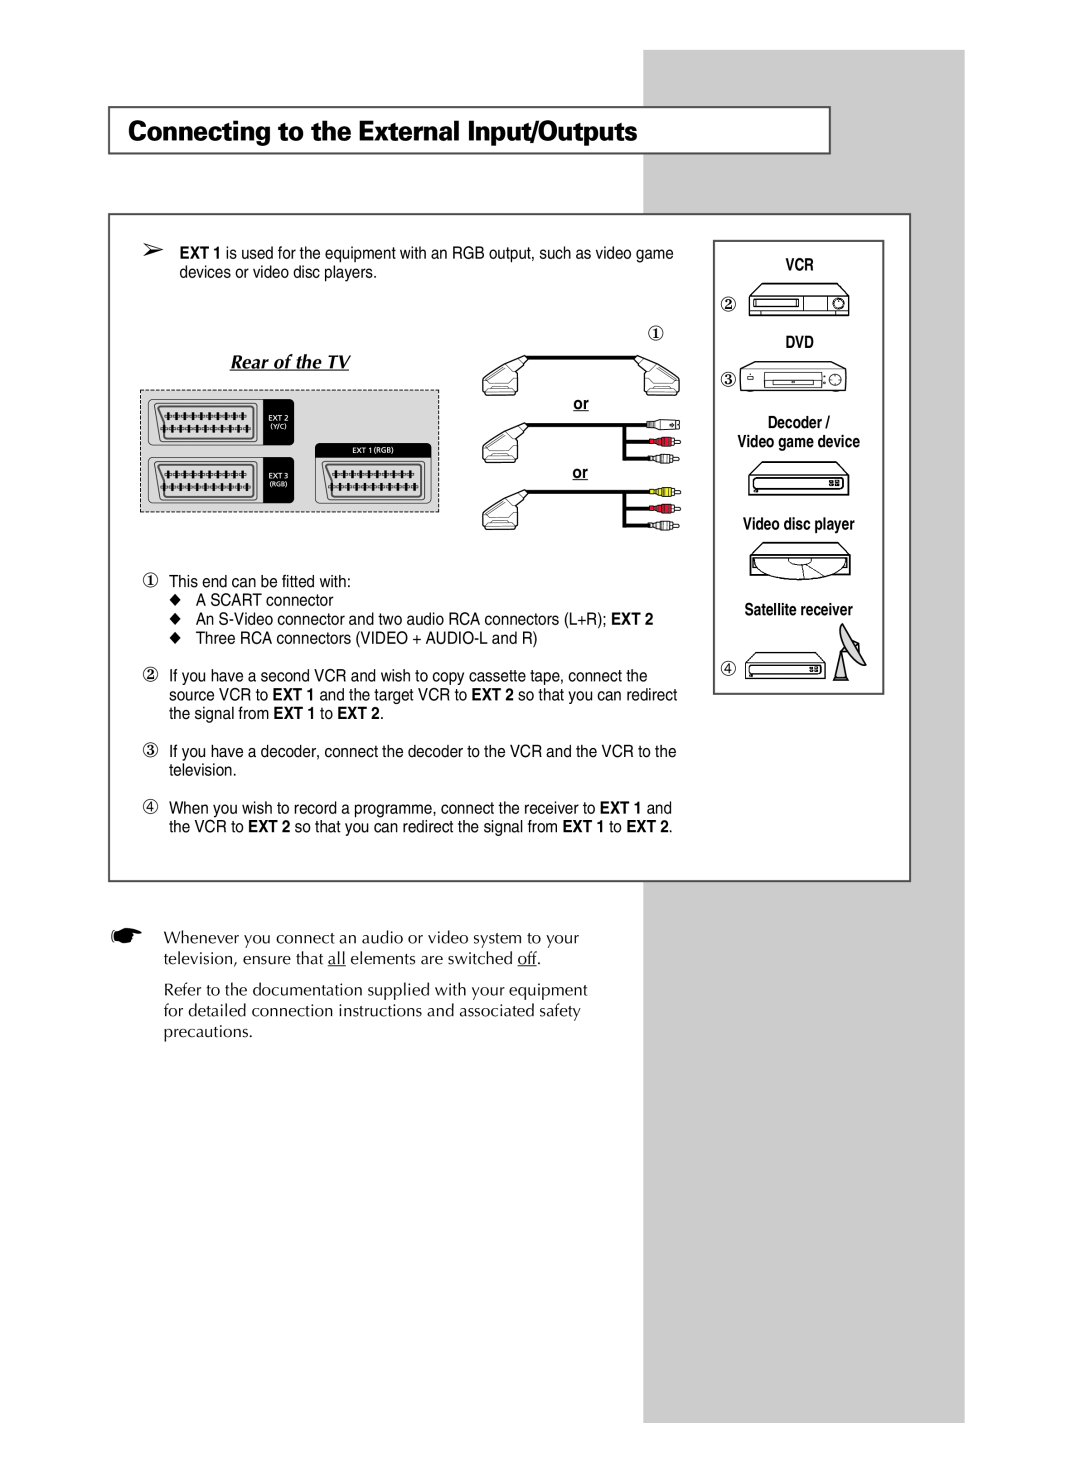 Samsung SP-43R1HL manual Connecting to the External Input/Outputs, Rear of the TV 